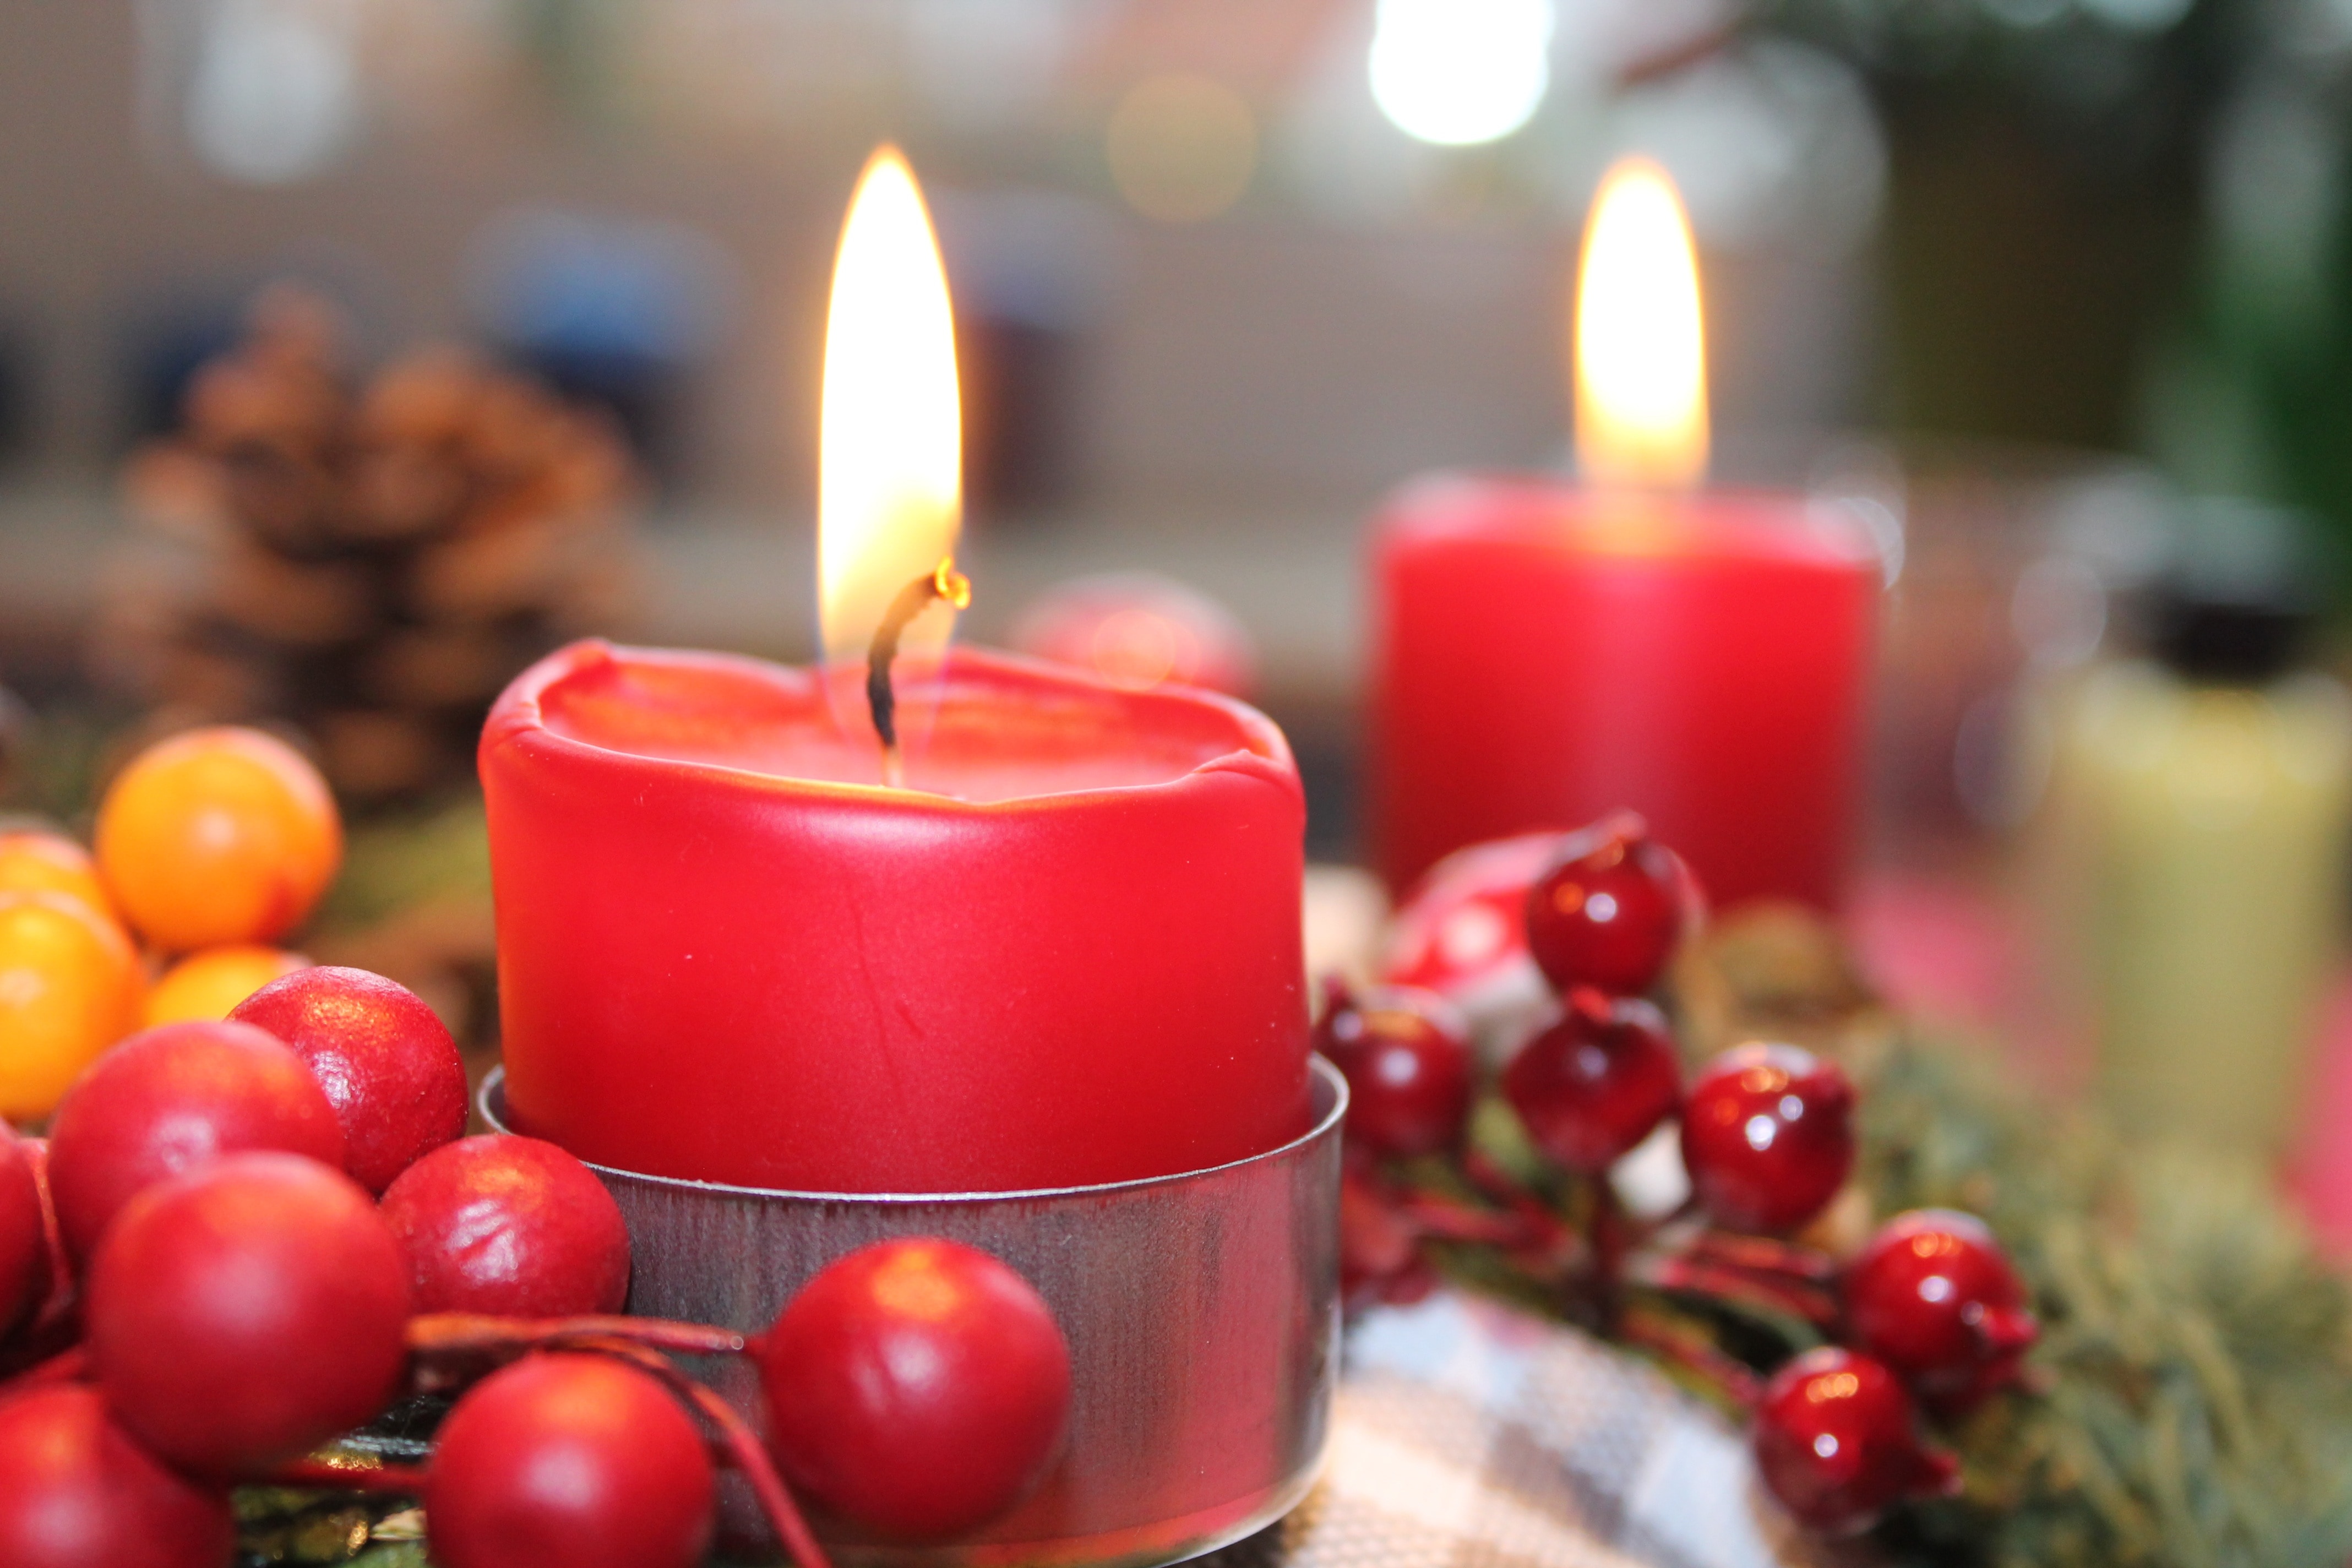 two lighted red candles